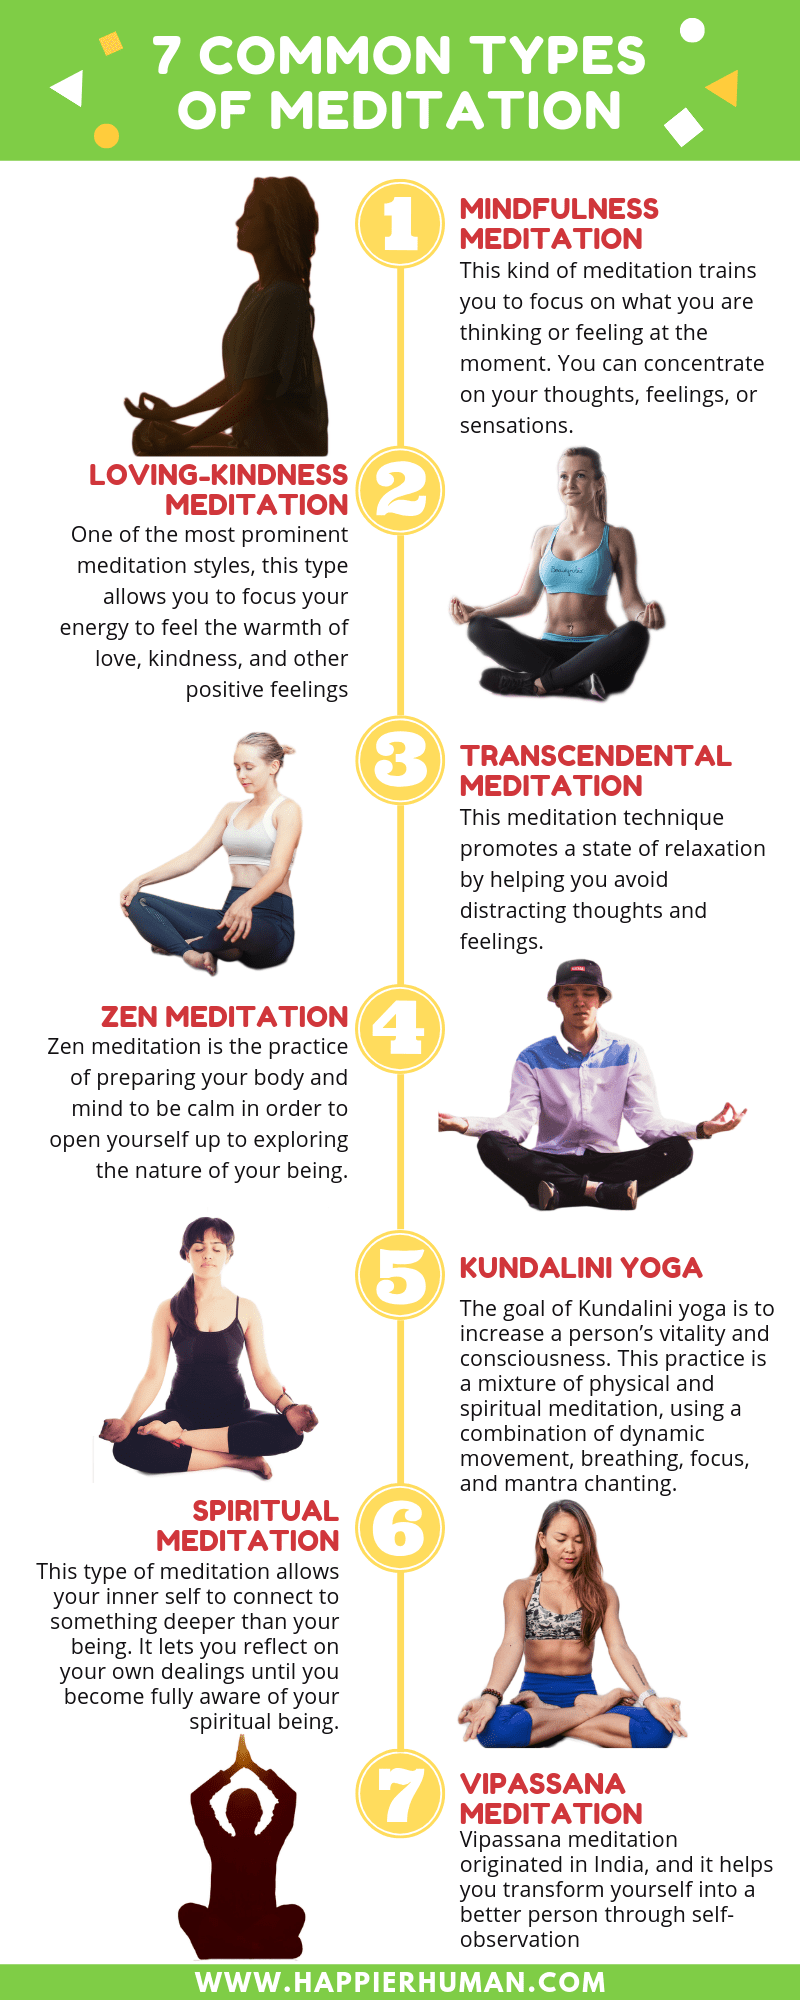 Top 10 Meditation Accessories to Complete Your Meditation Practice